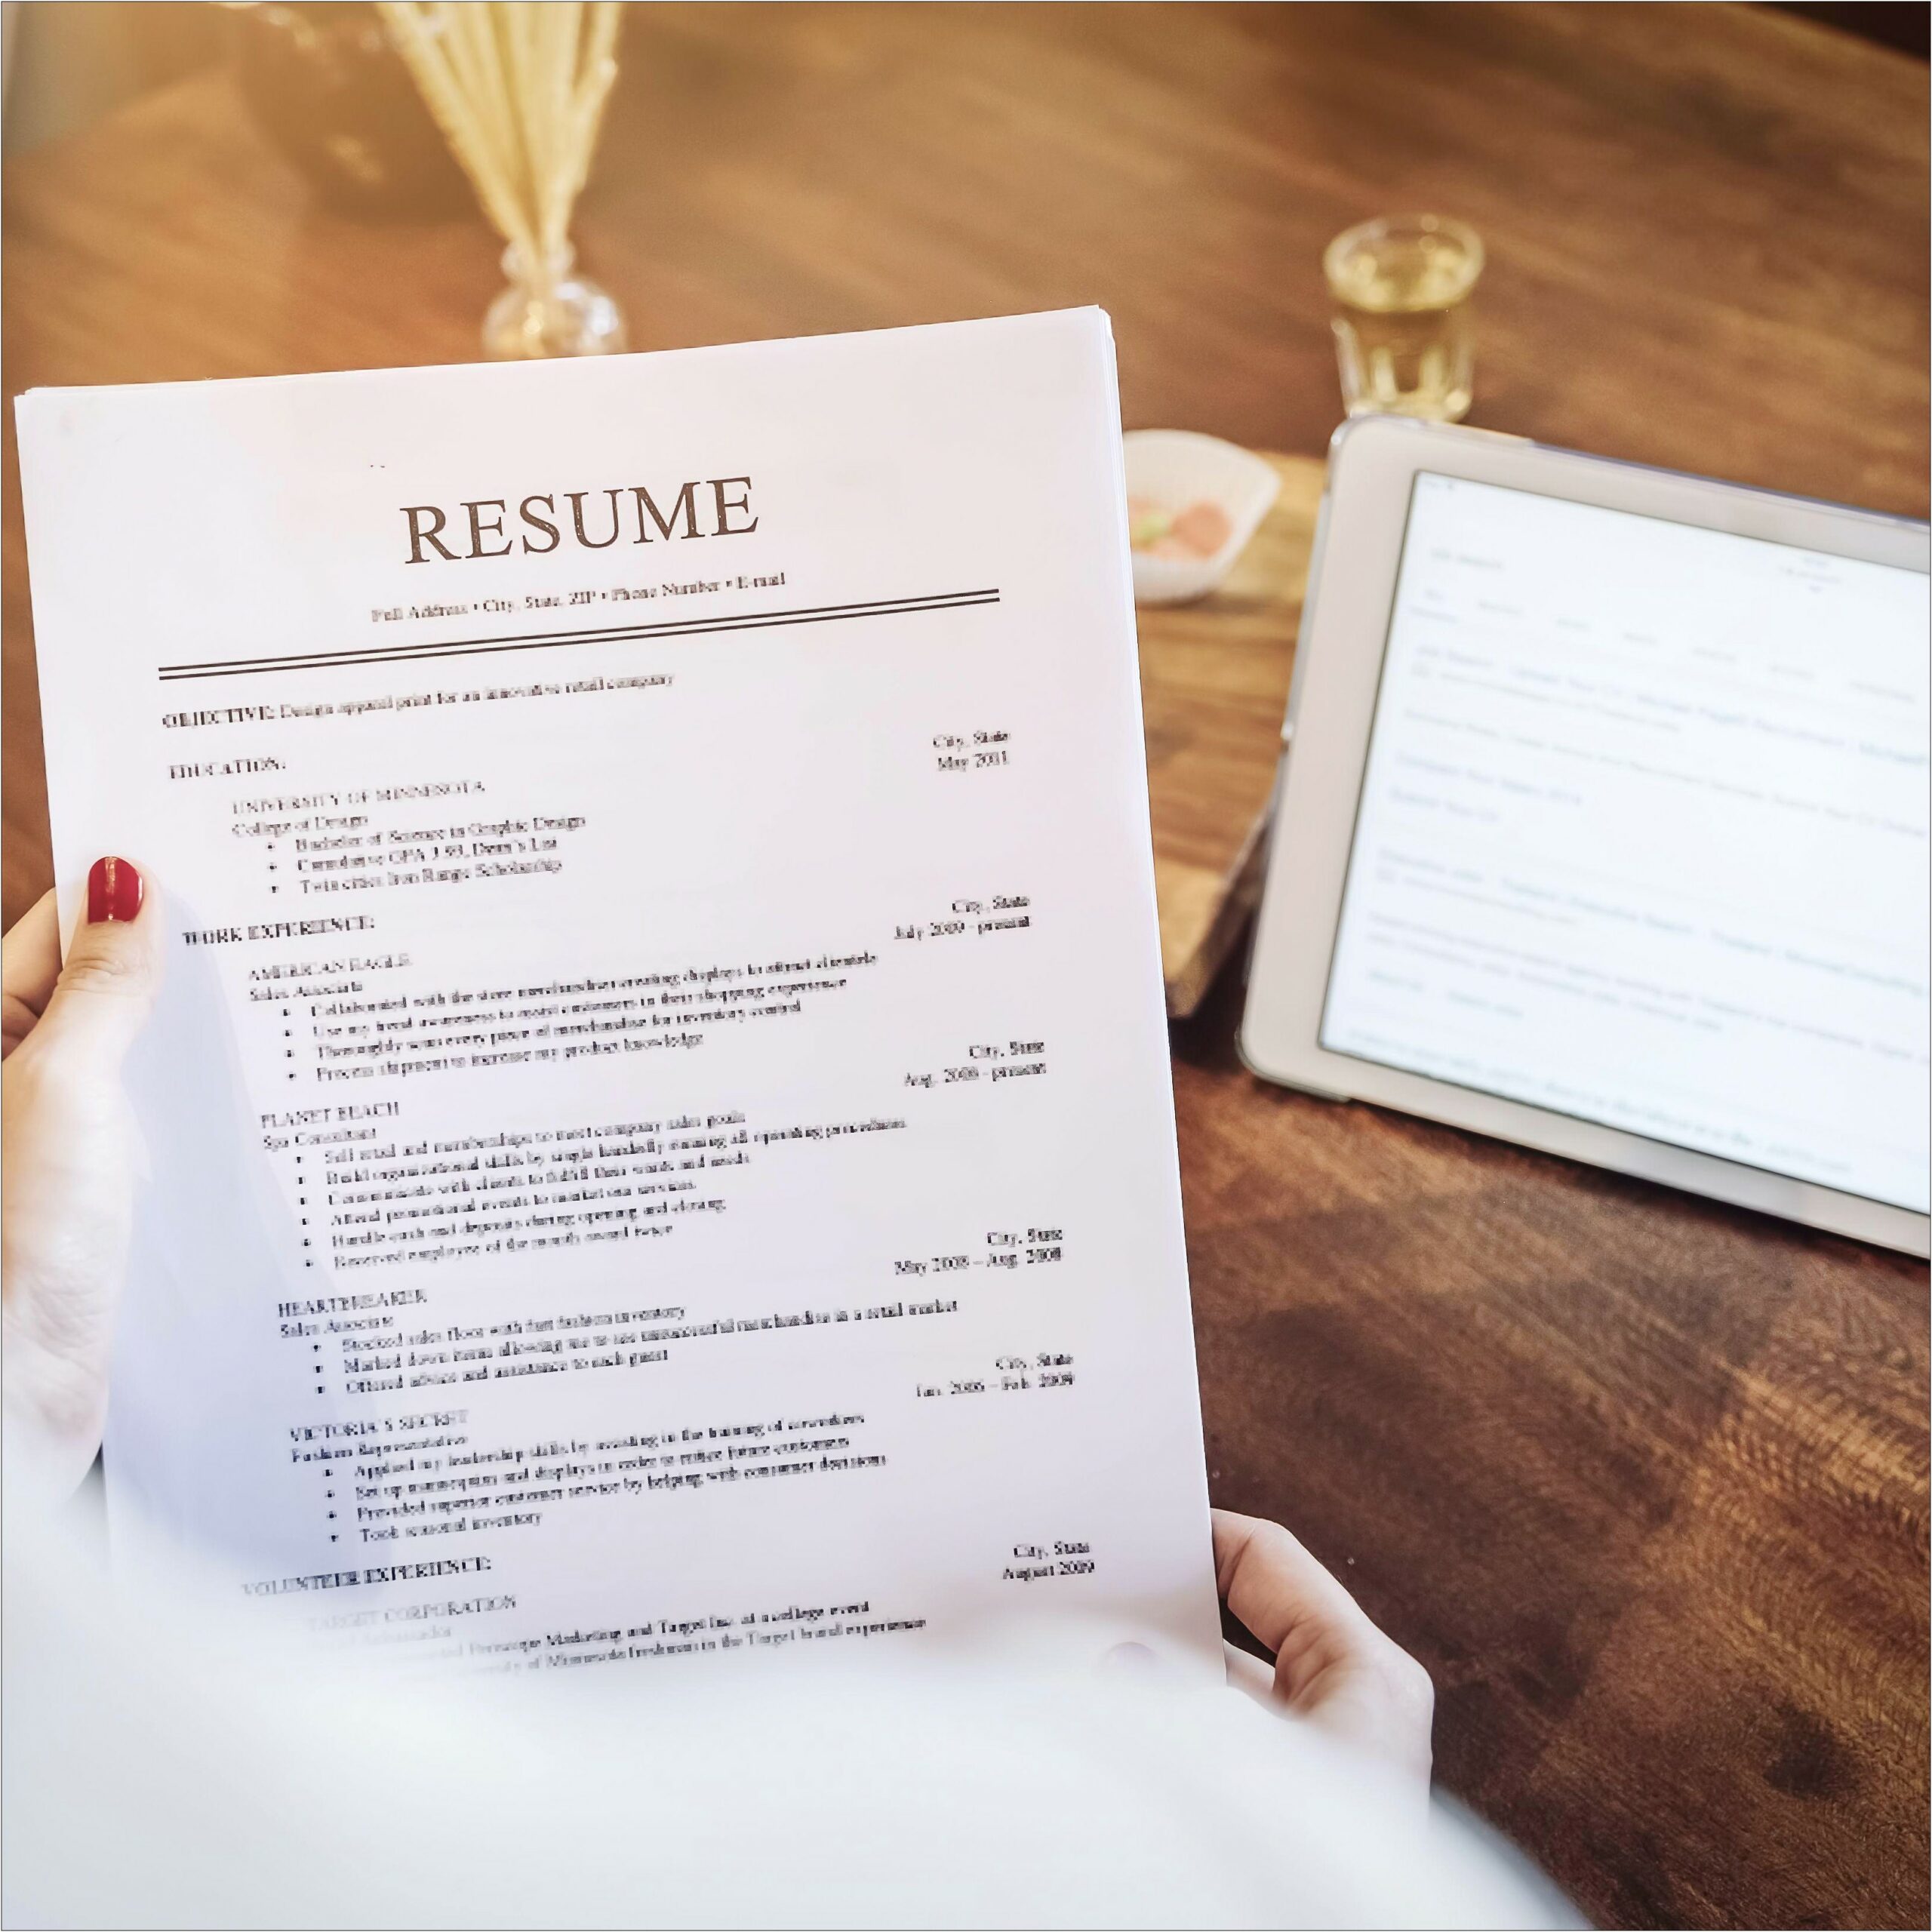 Update Resume And Key Words To Use